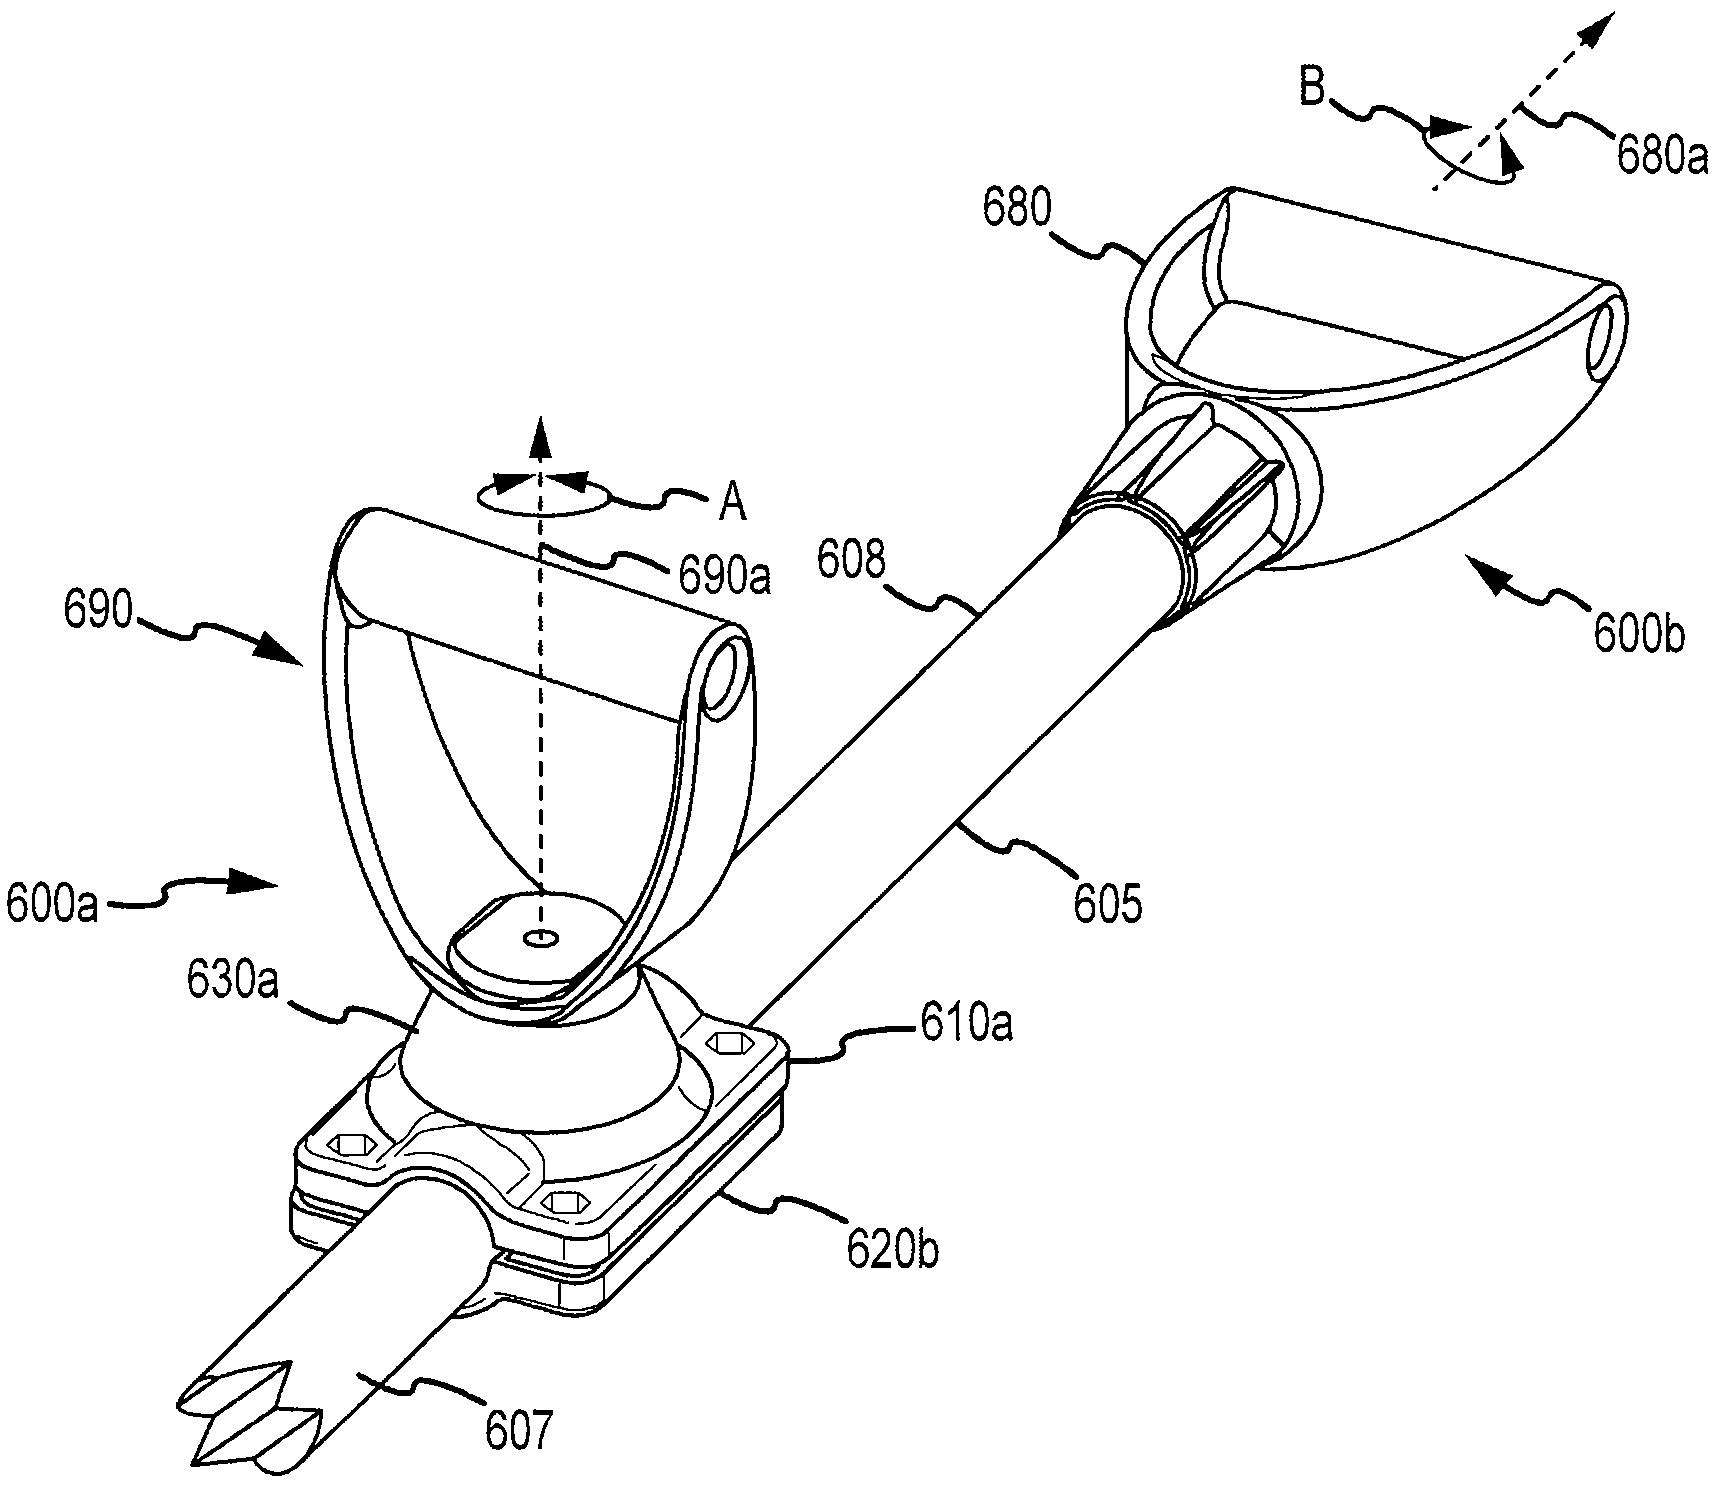 Adjustable handle clamp systems and methods